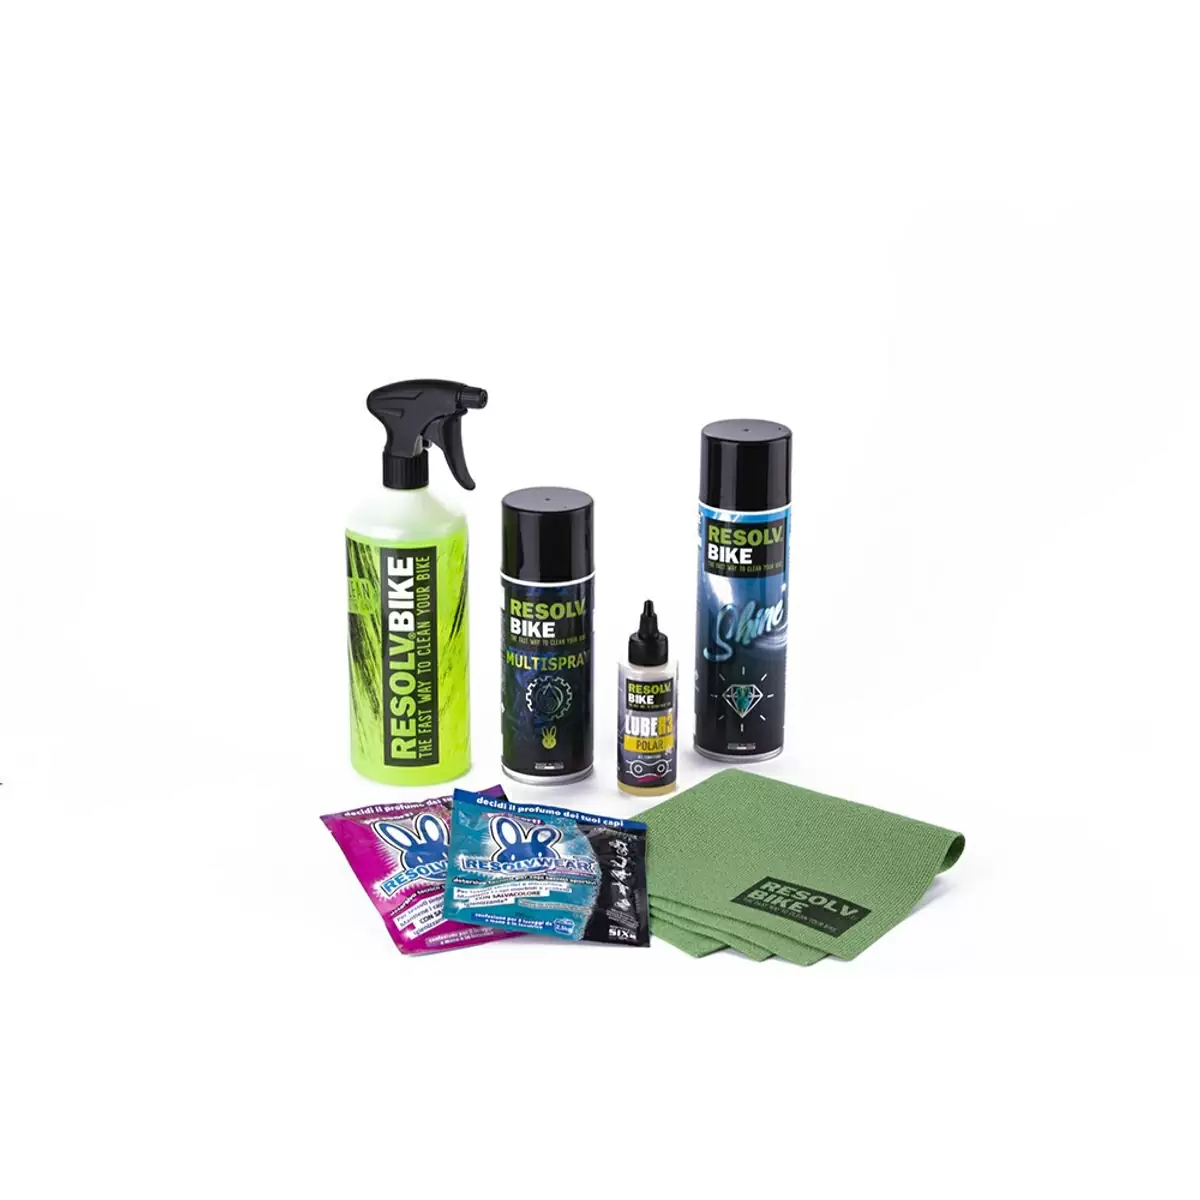 Kit For Complete Bike And Motorcycle Care #1